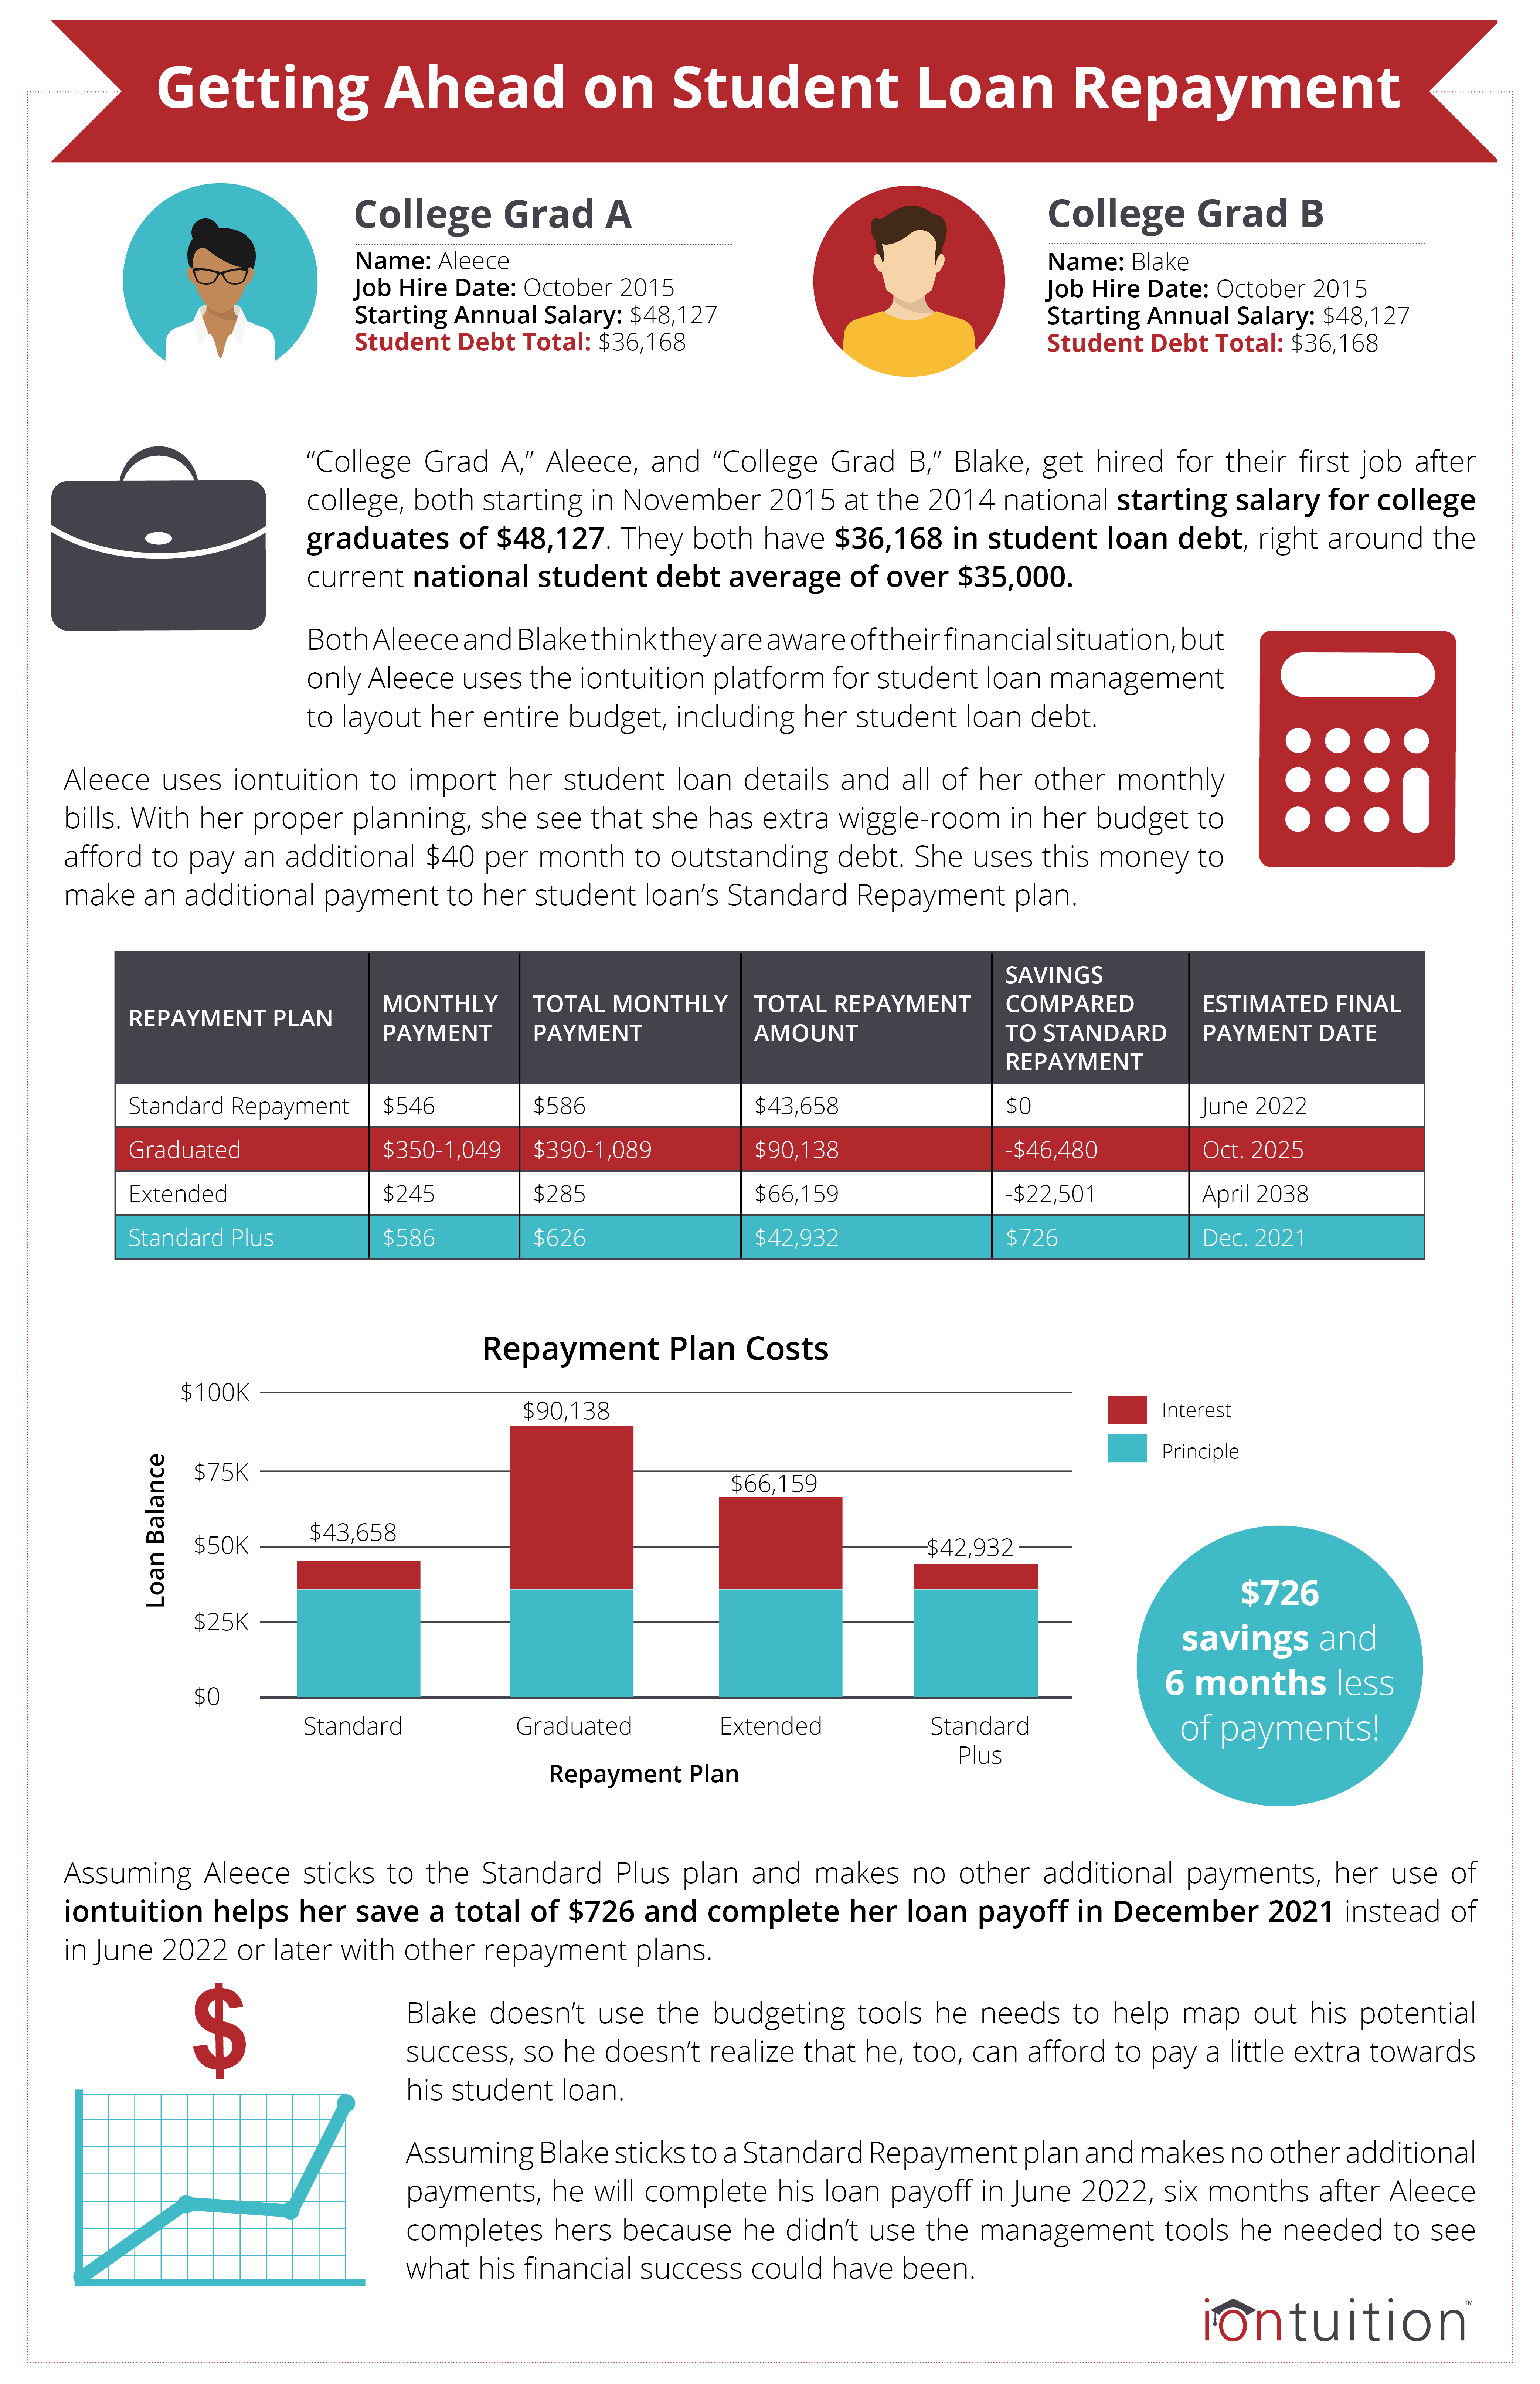 student-loan-repayment-scenario-infographic-iontuition-student-loan